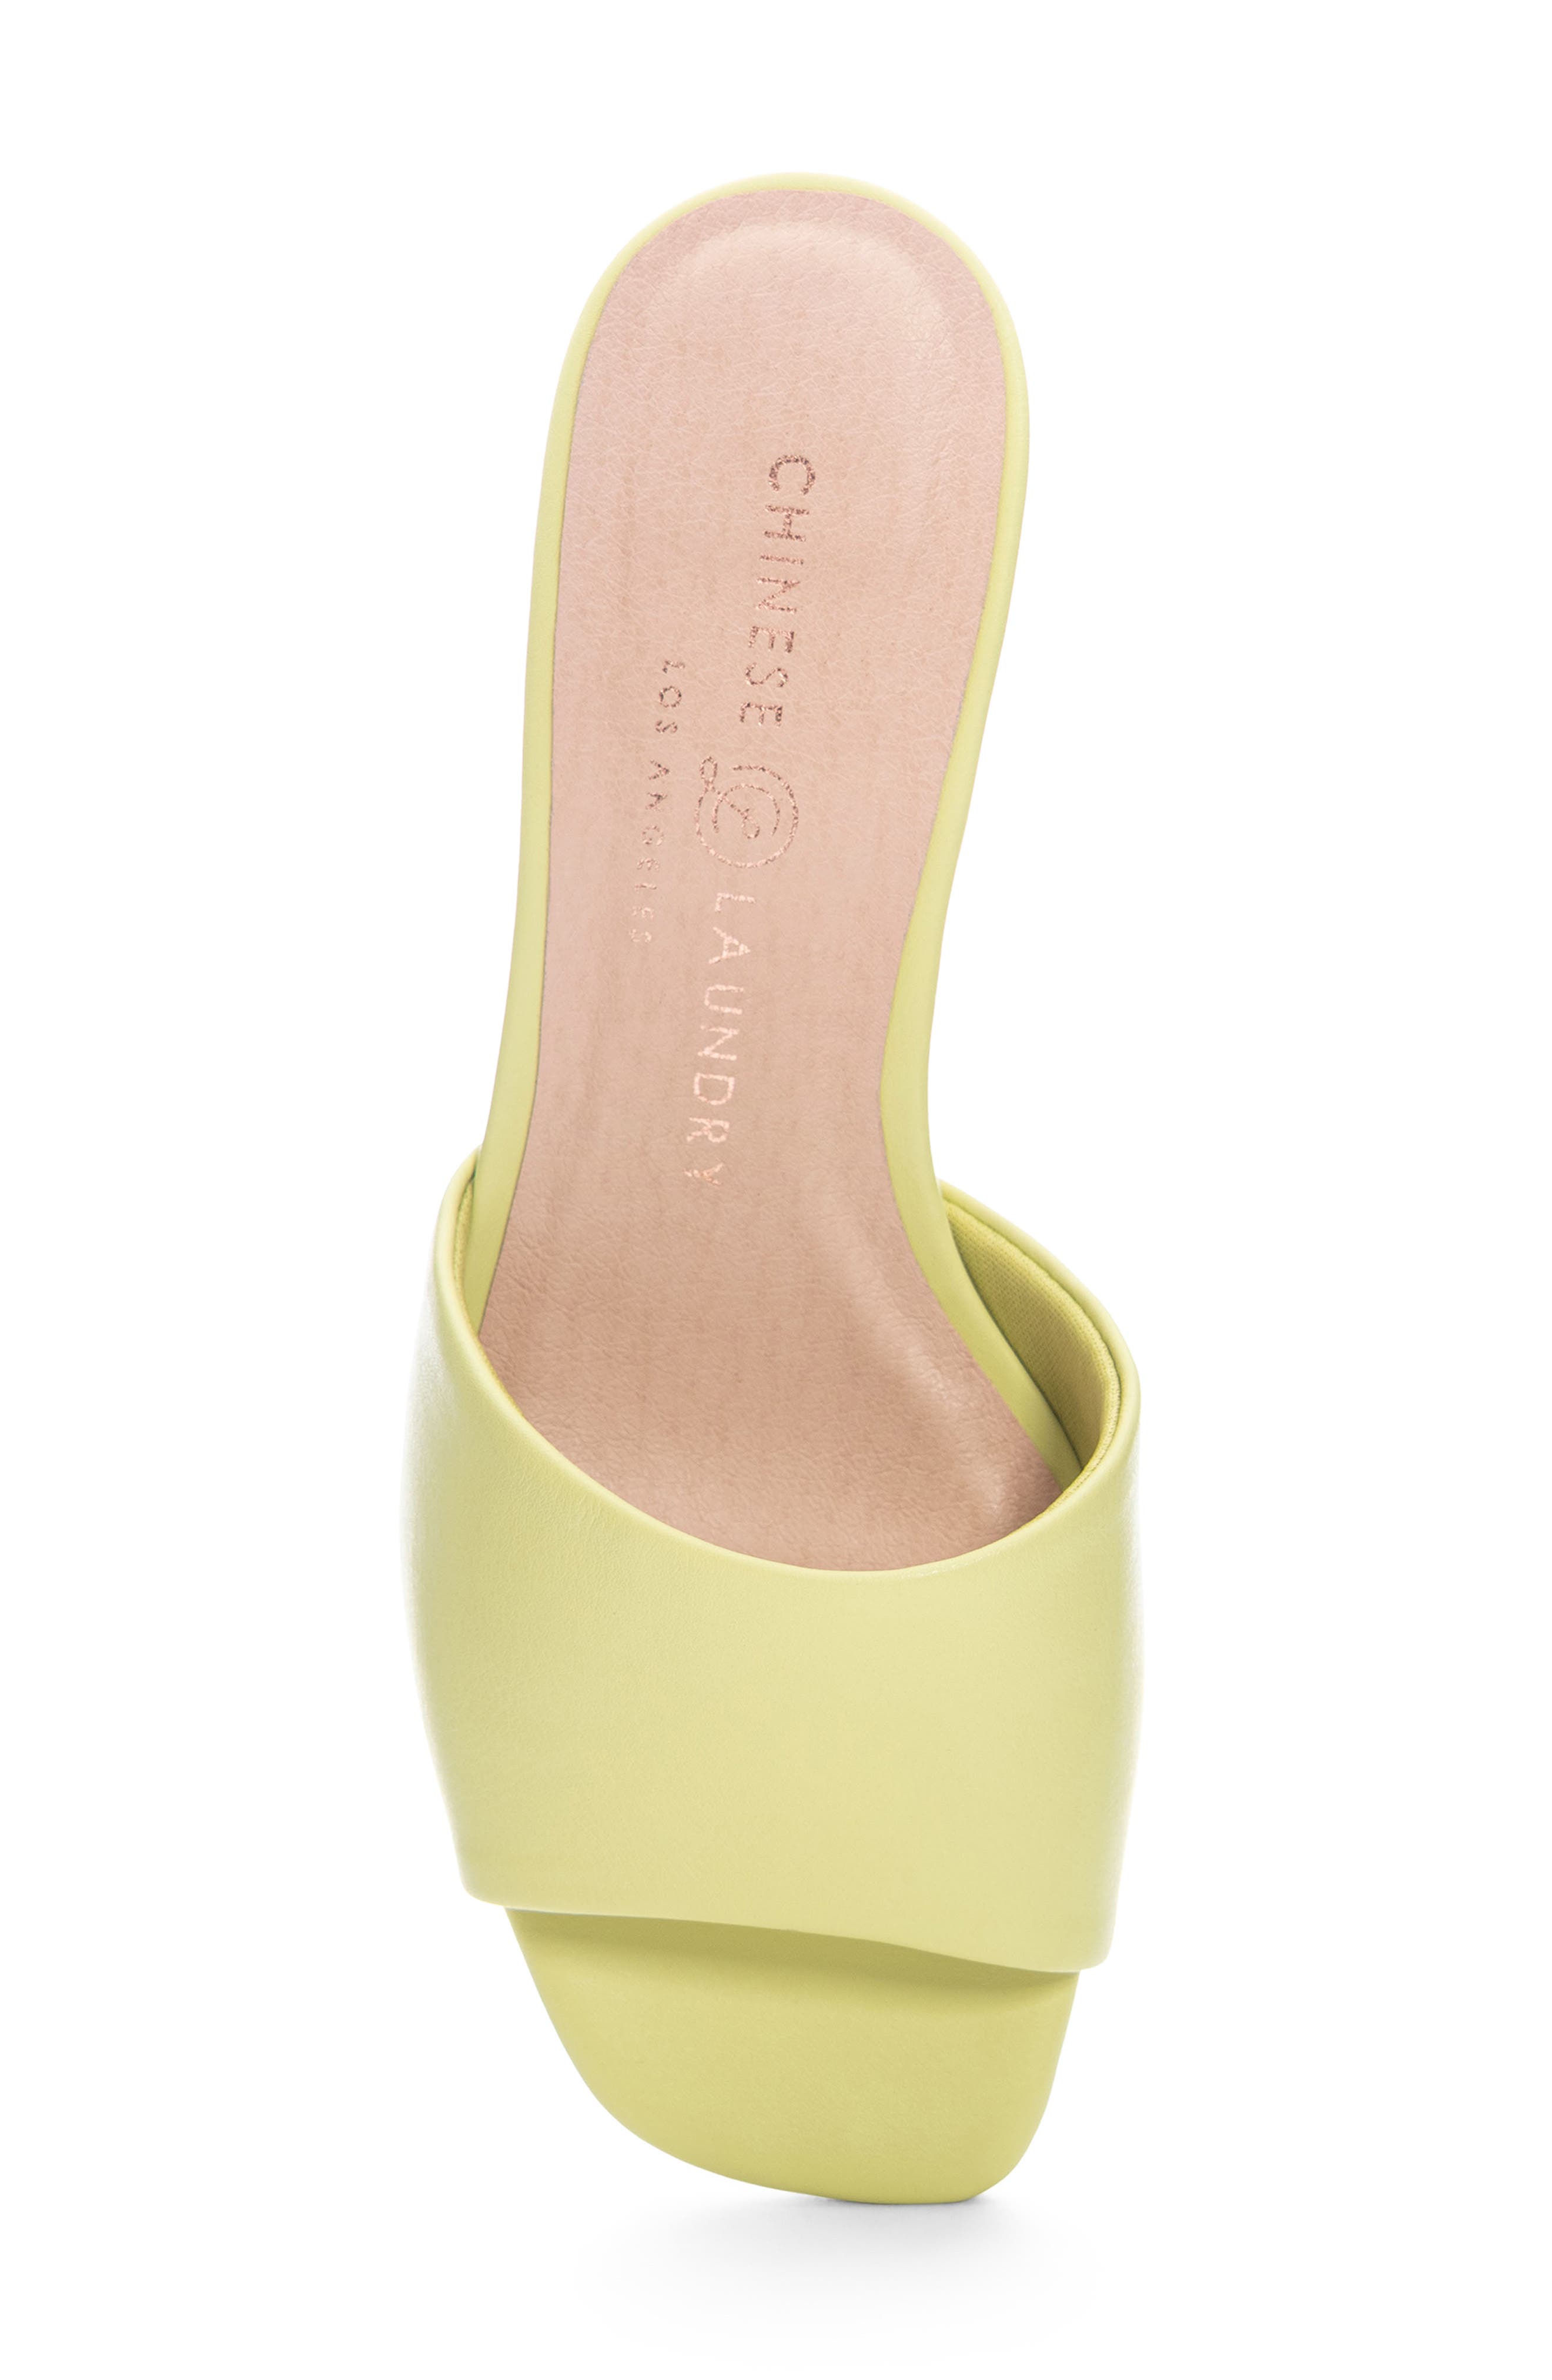 LADIES LIME GREEN COLOUR SLIP ON SHOE WITH FLOWER TRIM AND PEEP TOE IN SIZE 8 